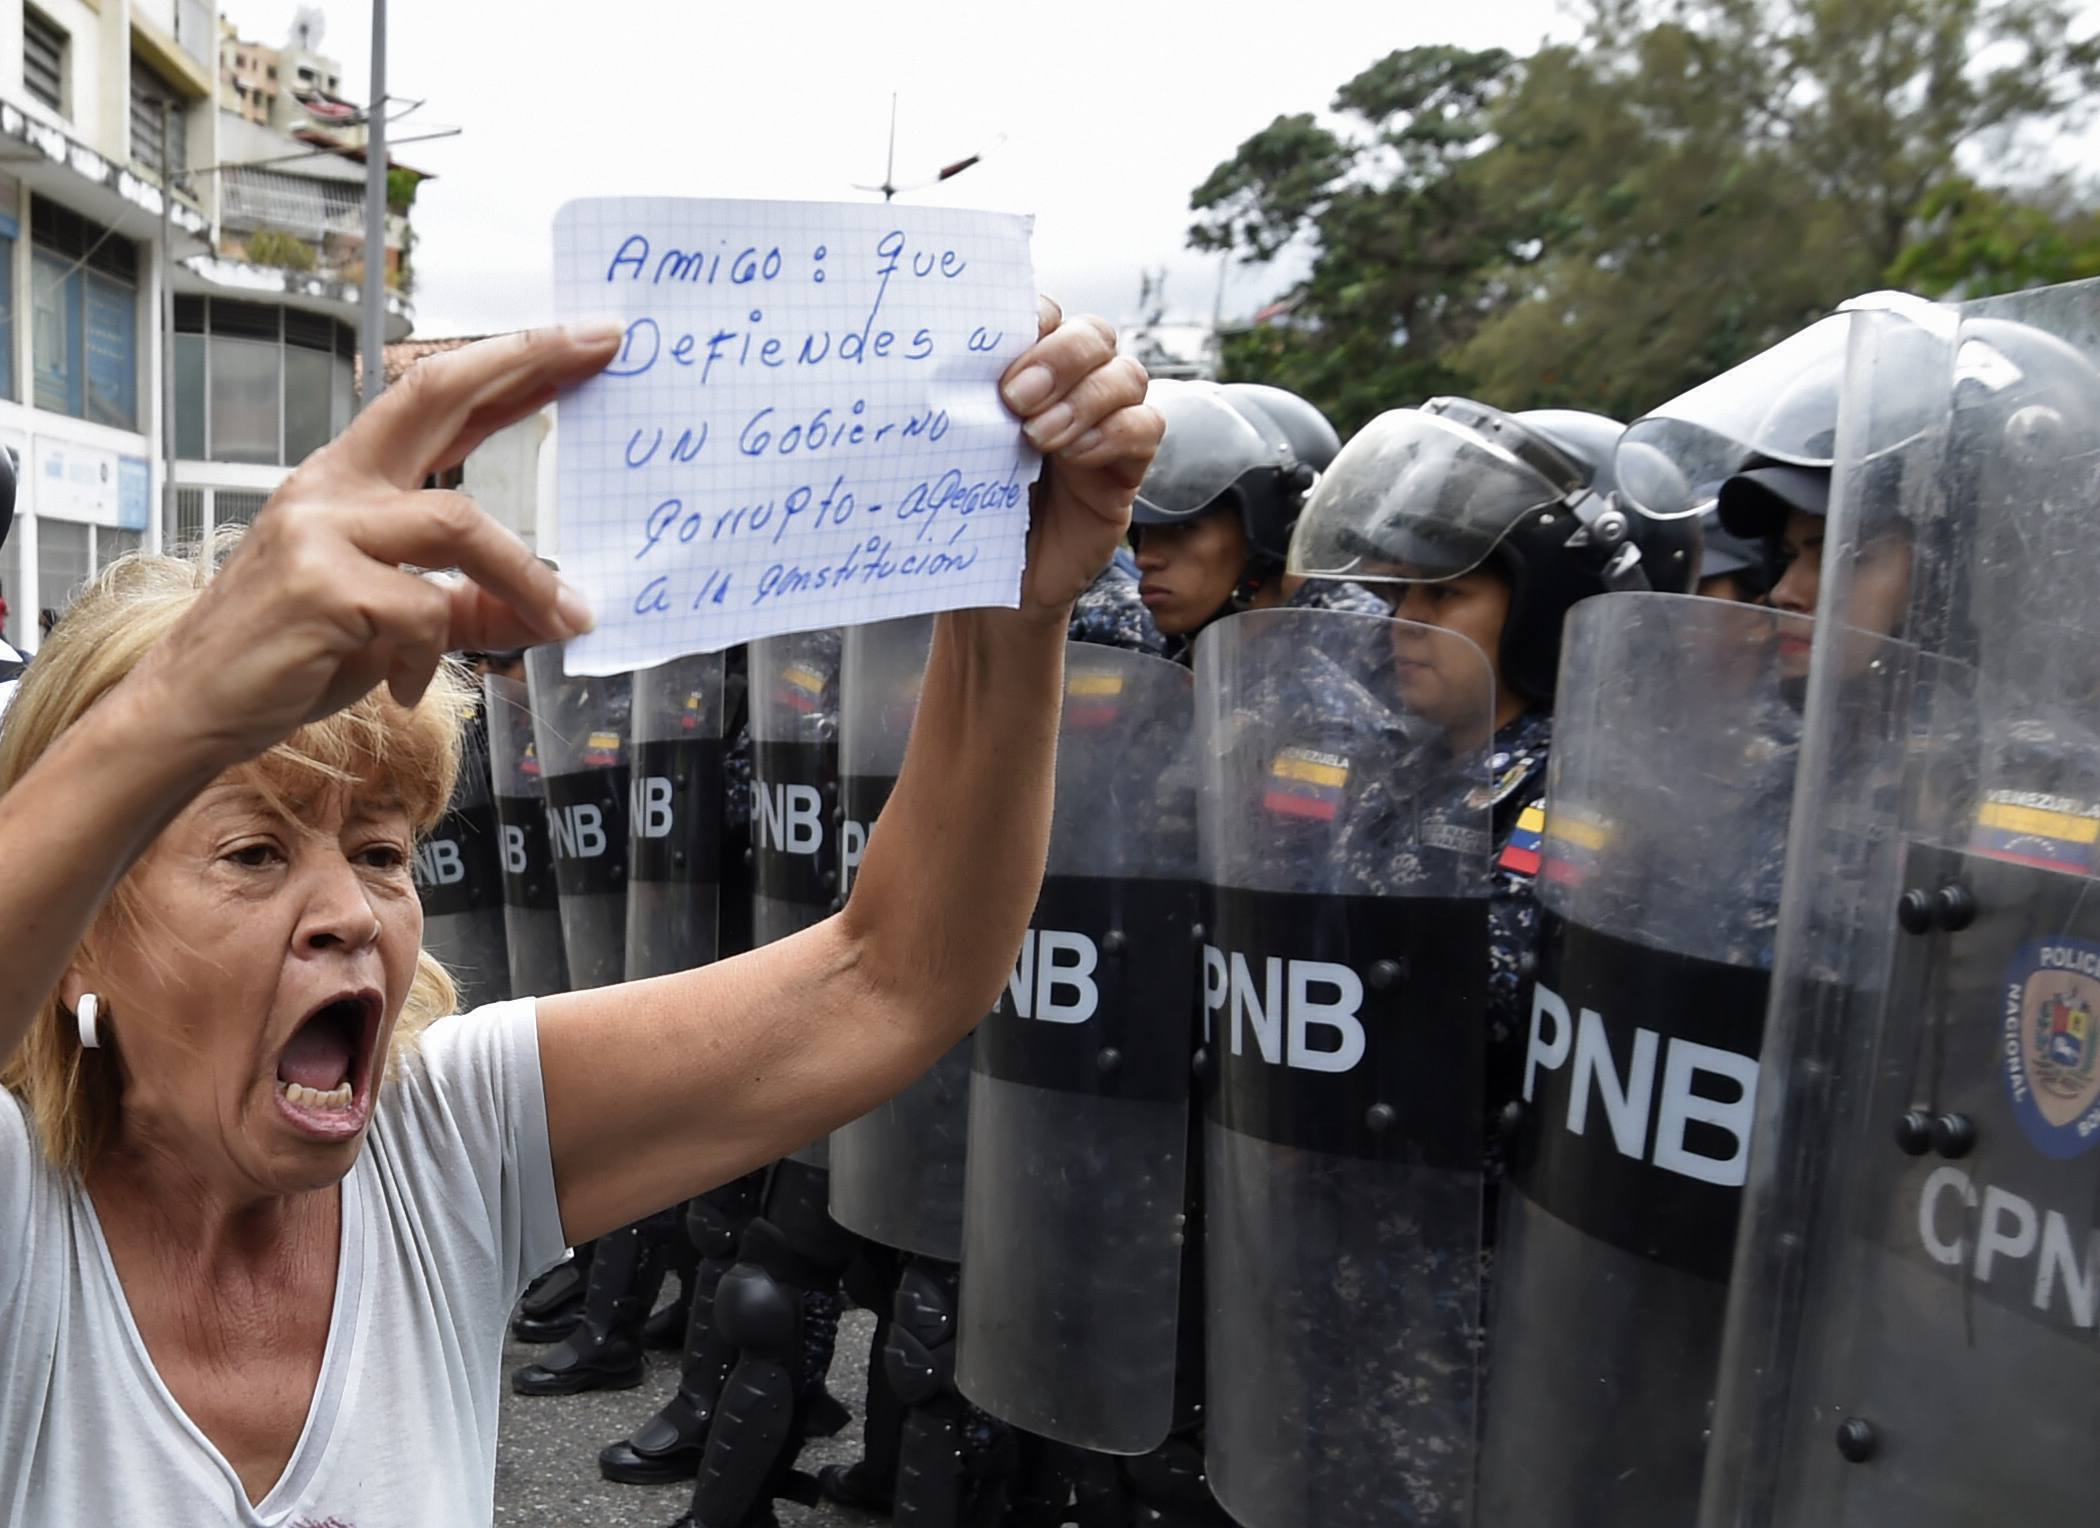 A woman demonstrates with a sign reading "Friend: you who defend a corrupt government, get attached to the constitution", in front of a line of riot police outside the Venezuelan Navy command headquarters at San Bernardino neighborhood in Caracas on May 4, 2019. - Venezuelan President Nicolas Maduro called on the armed forces to be "ready" in the event of a US military offensive against the South American country, in a speech to troops on Saturday. His speech at a military base came as opposition leader Juan Guaido rallied his supporters in a new day of protests to press the armed forces to support his bid to dislodge Maduro. (JUAN BARRETO/AFP via Getty Images)